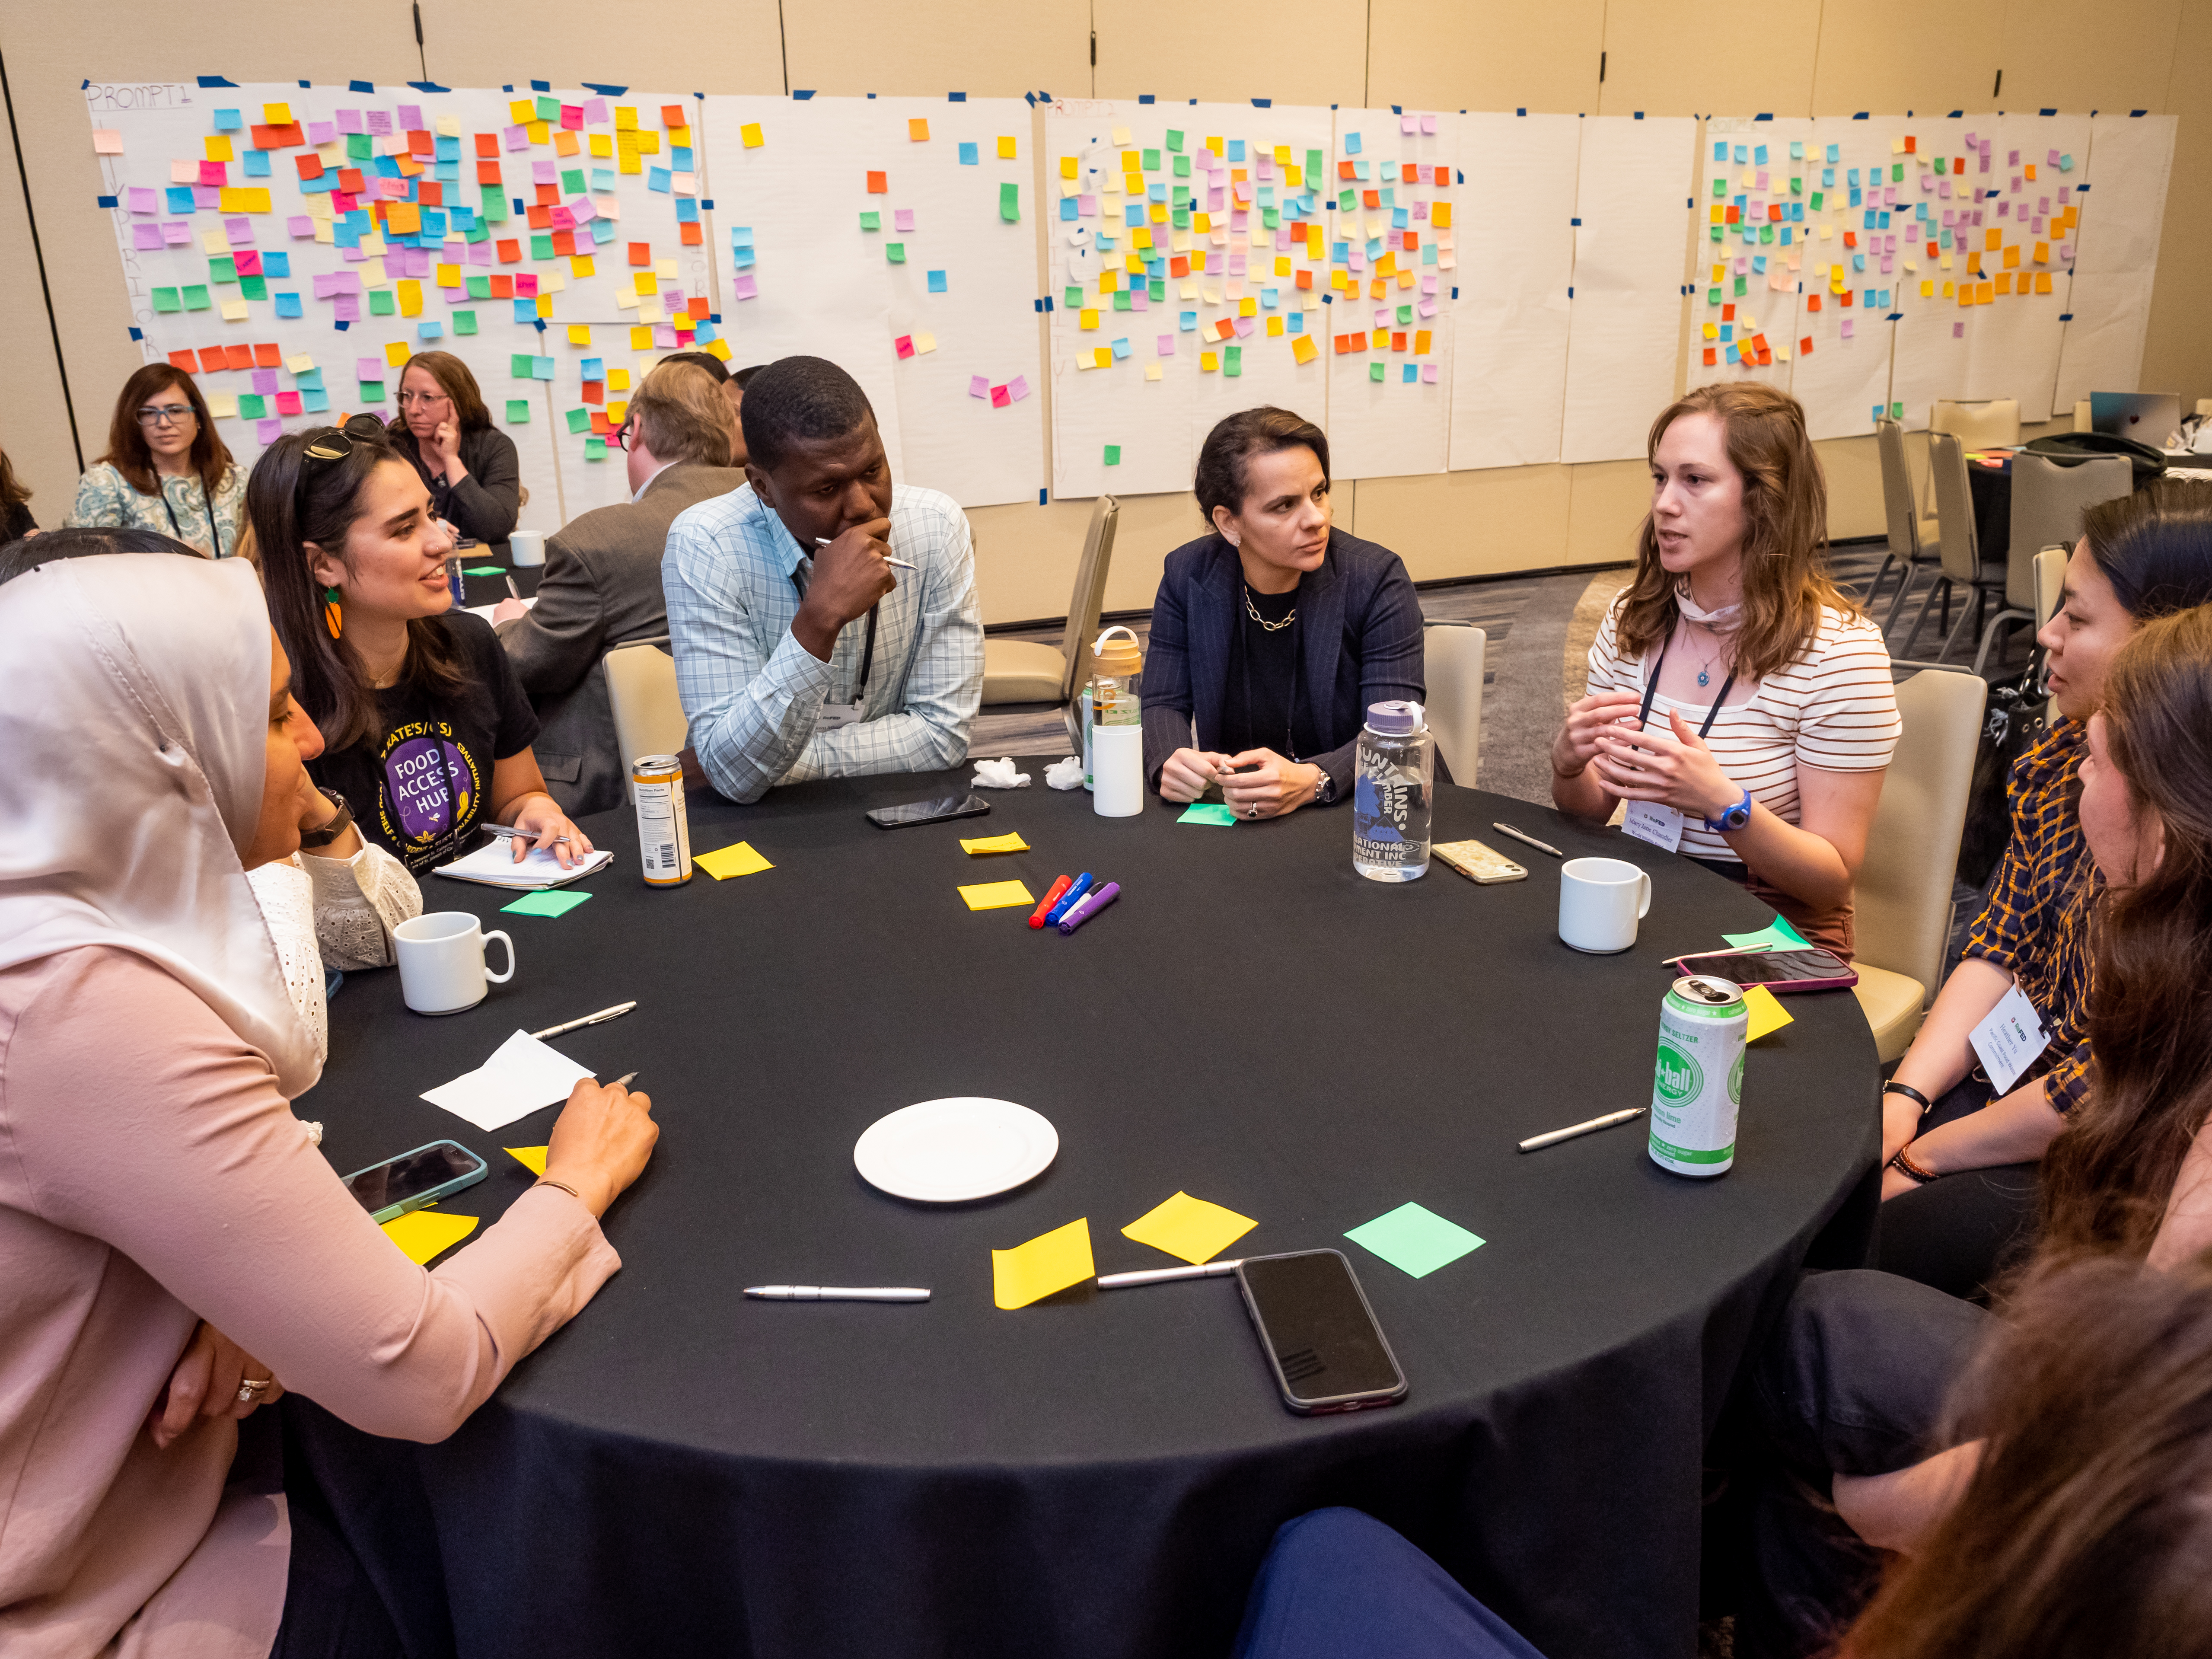 A group of people are sitting at a table and talking about food waste in a room featuring white sheets of paper covered with colorful sticky notes.